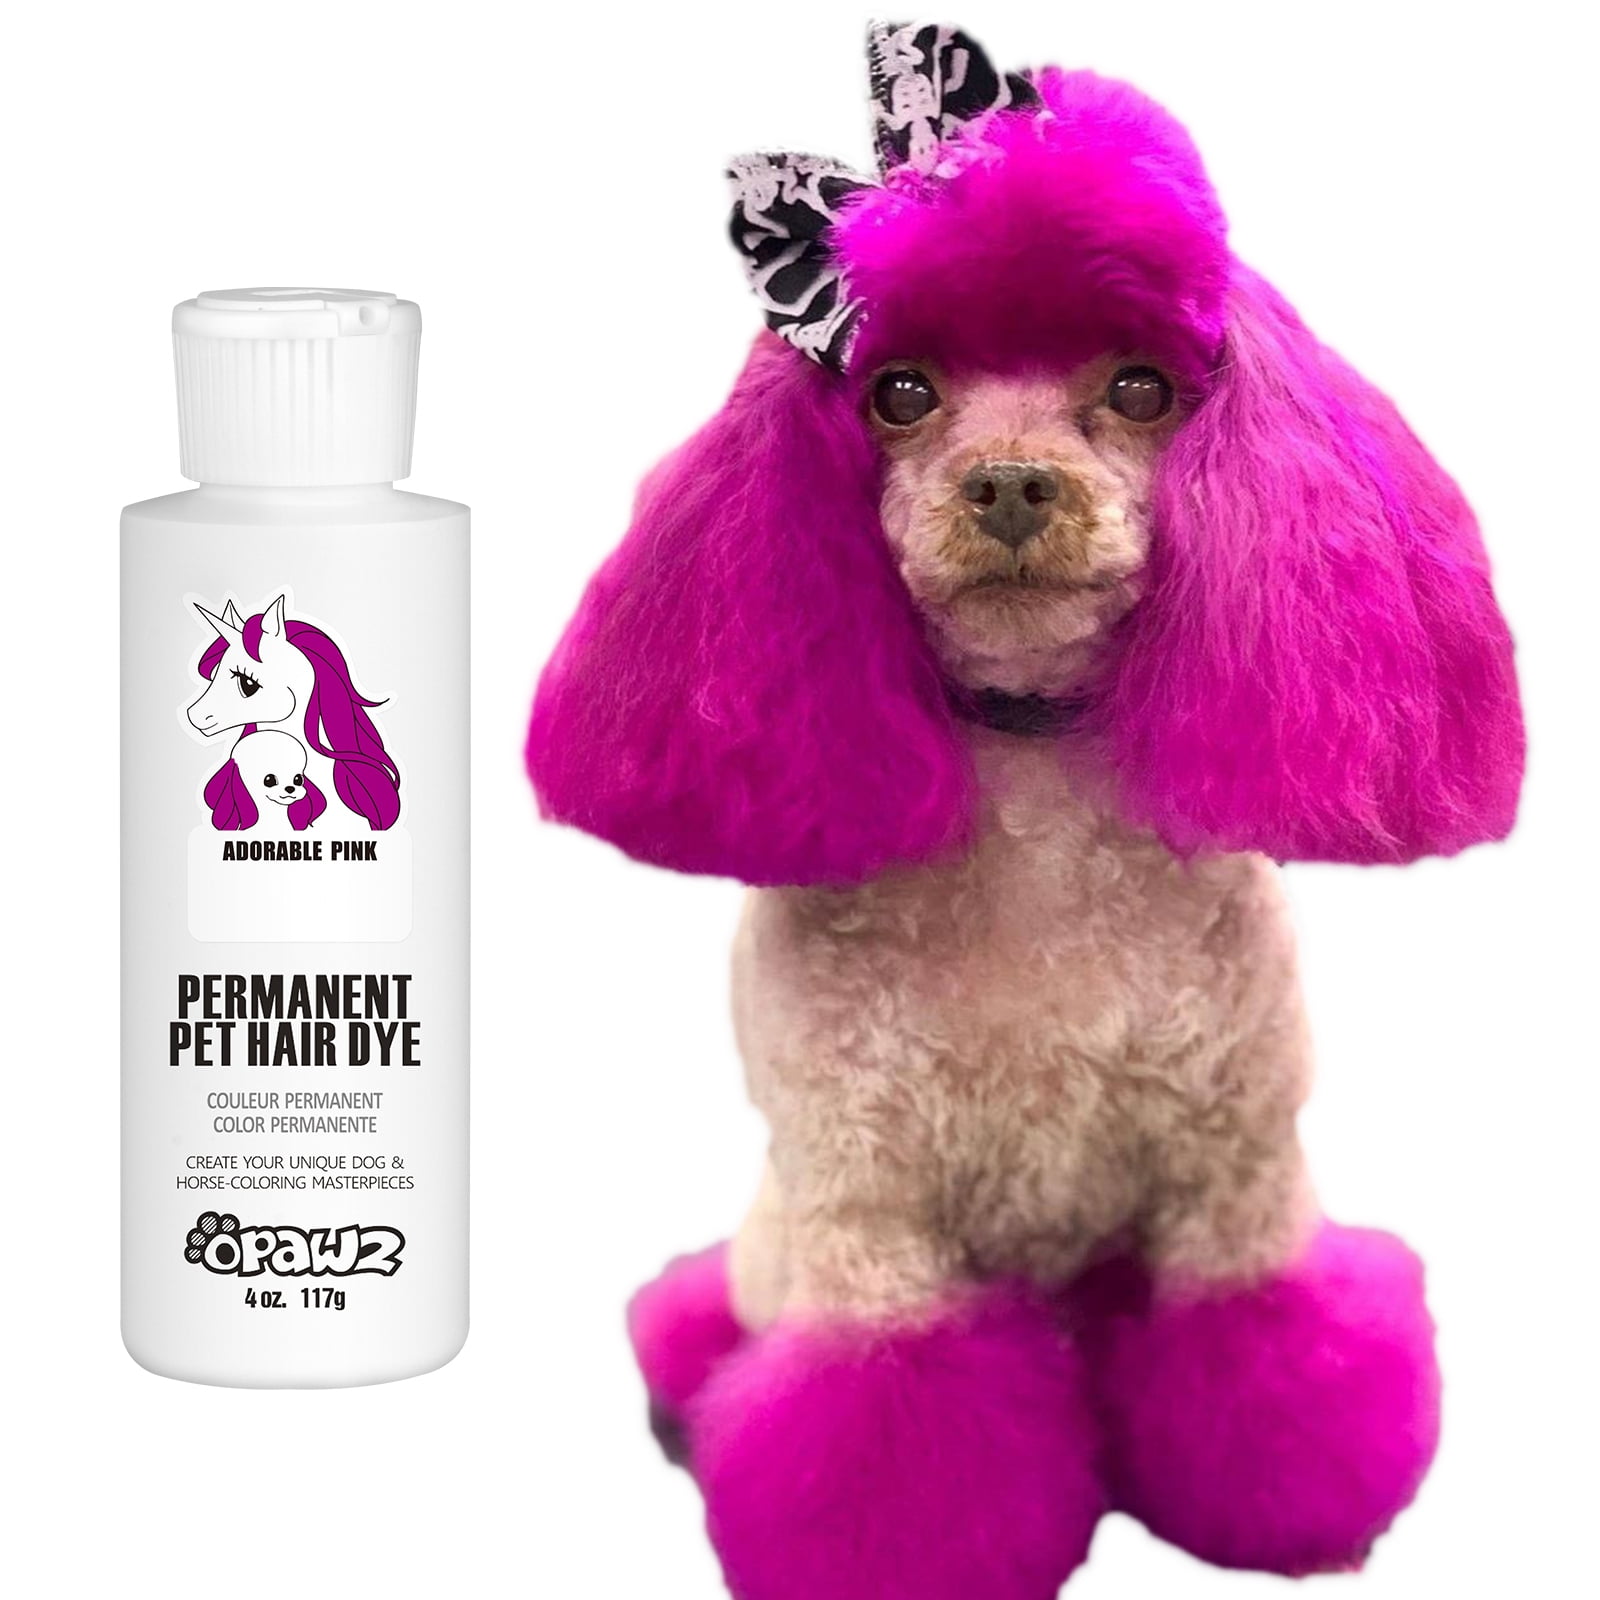 Adorable Pink Dog Hair Dye by OPAWZ - Lasts 20 Washes